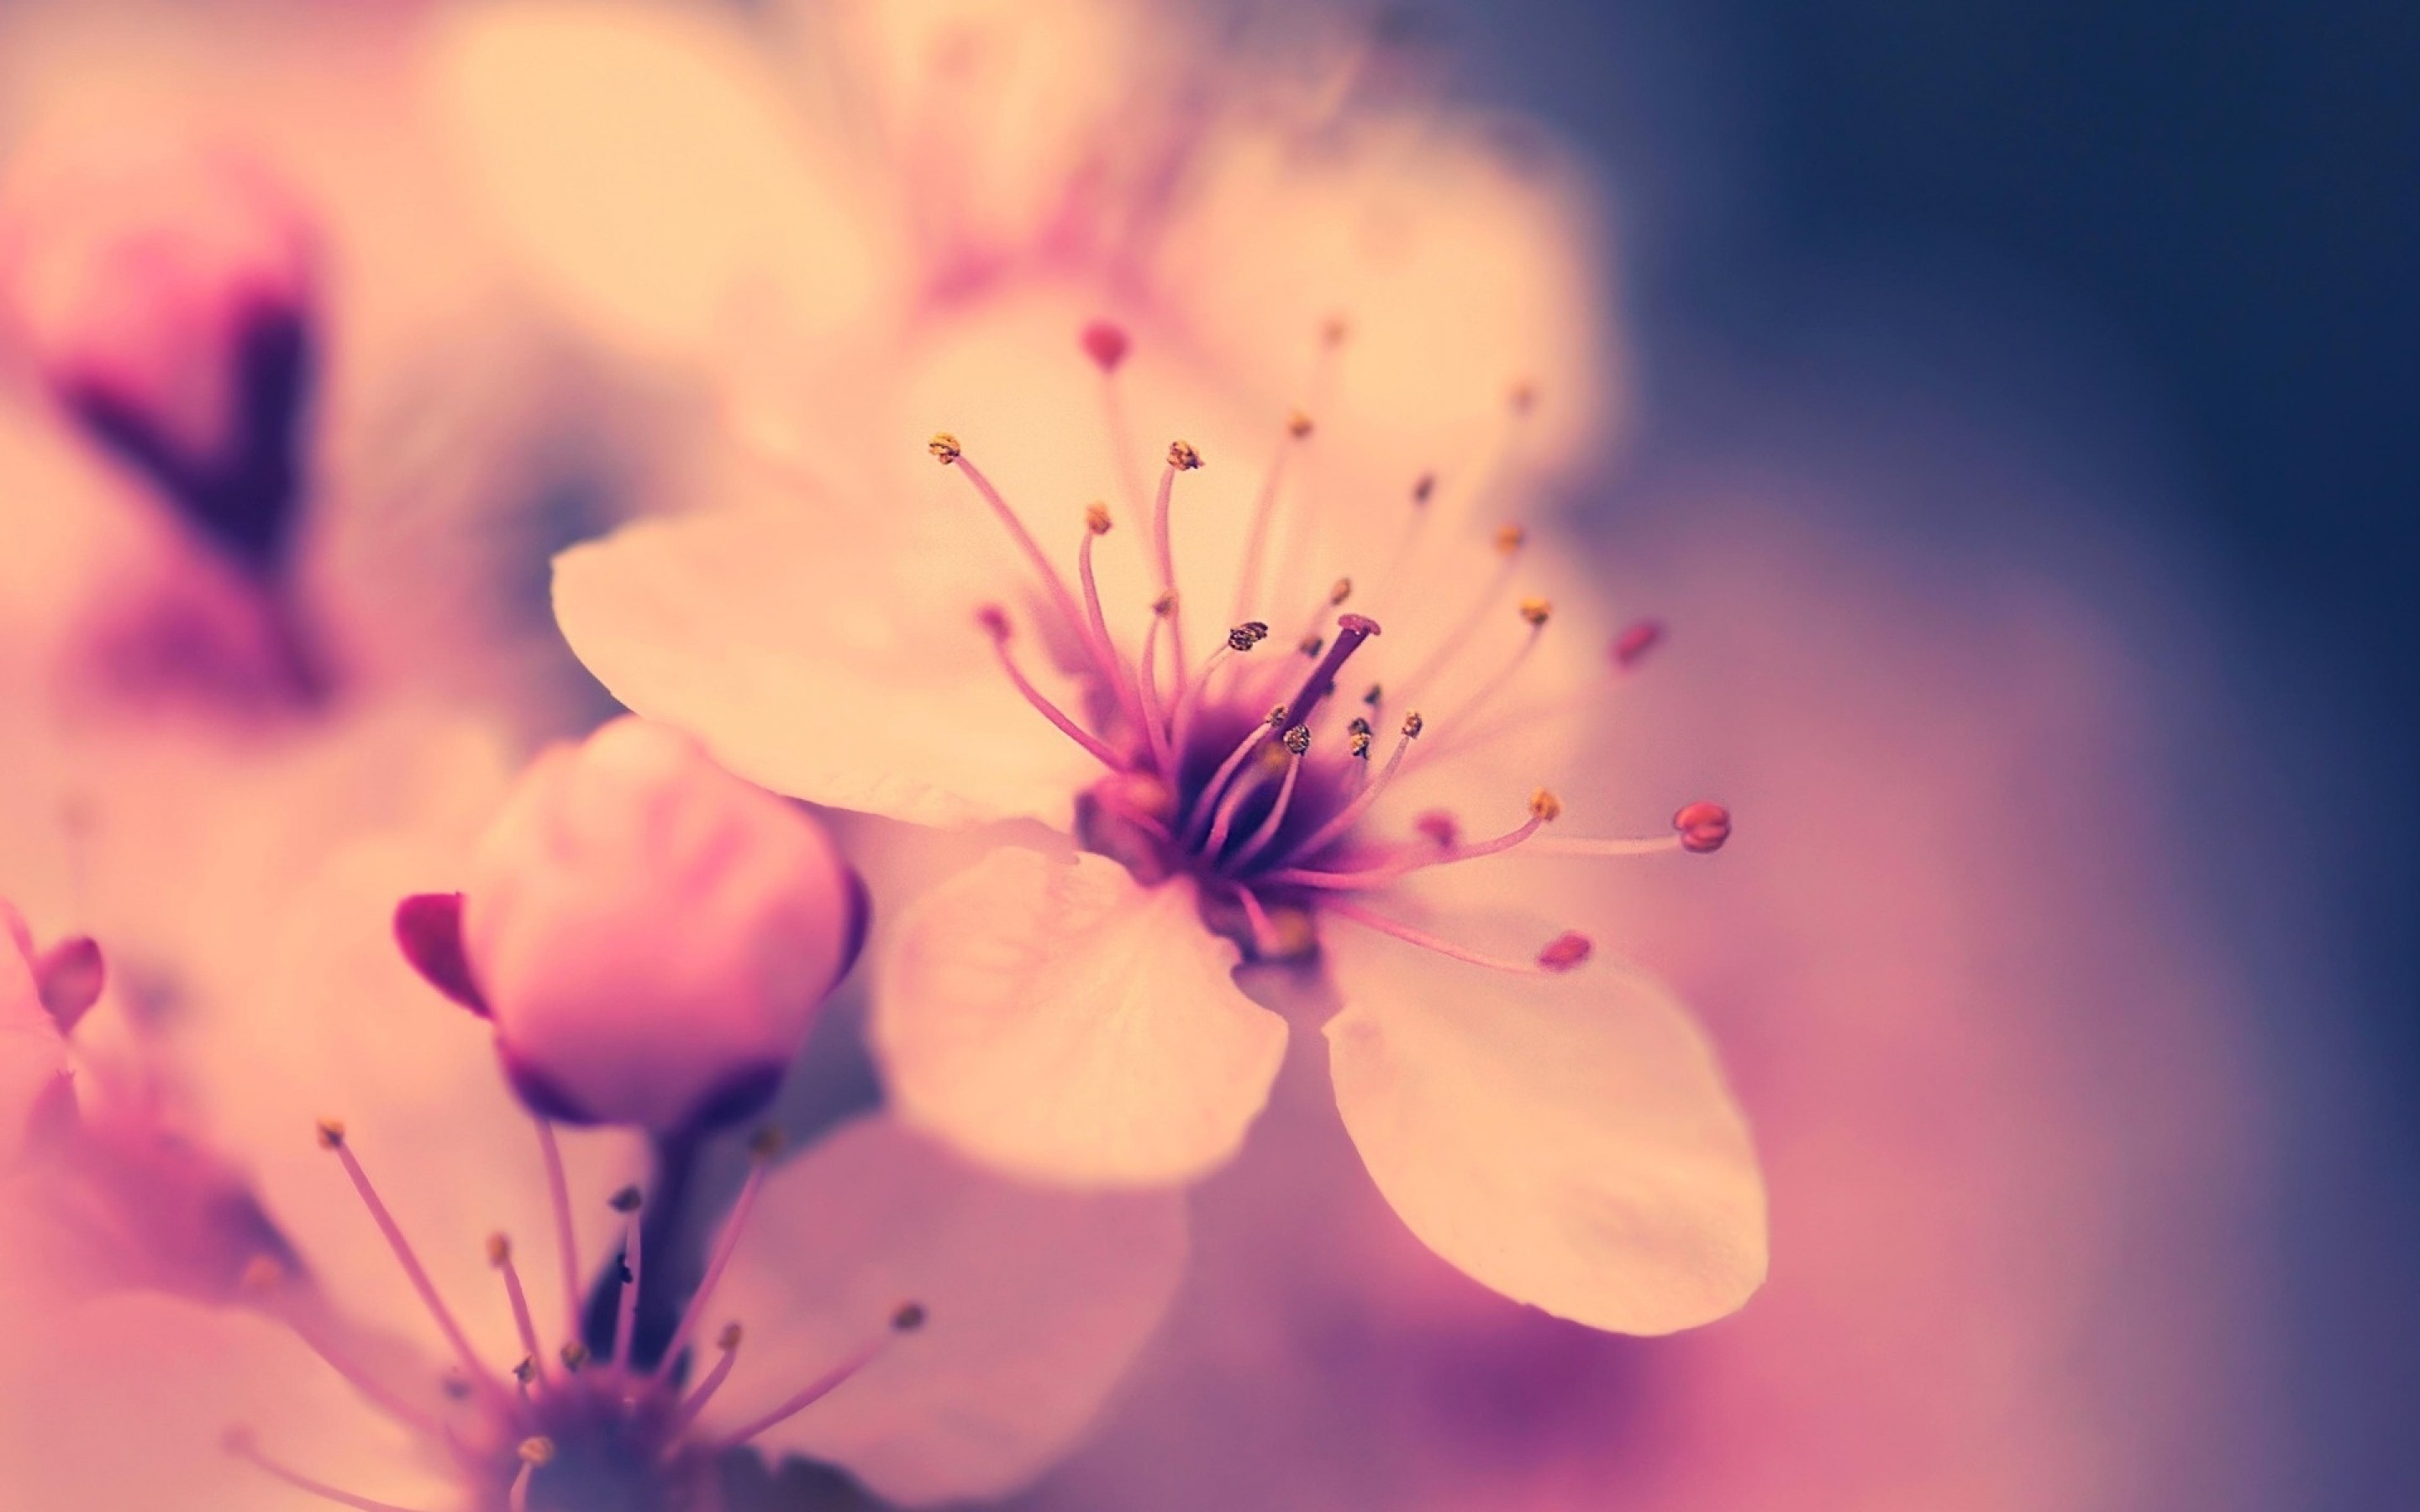 Vintage Cherry Blossom Photography in High Resolution at Flowers